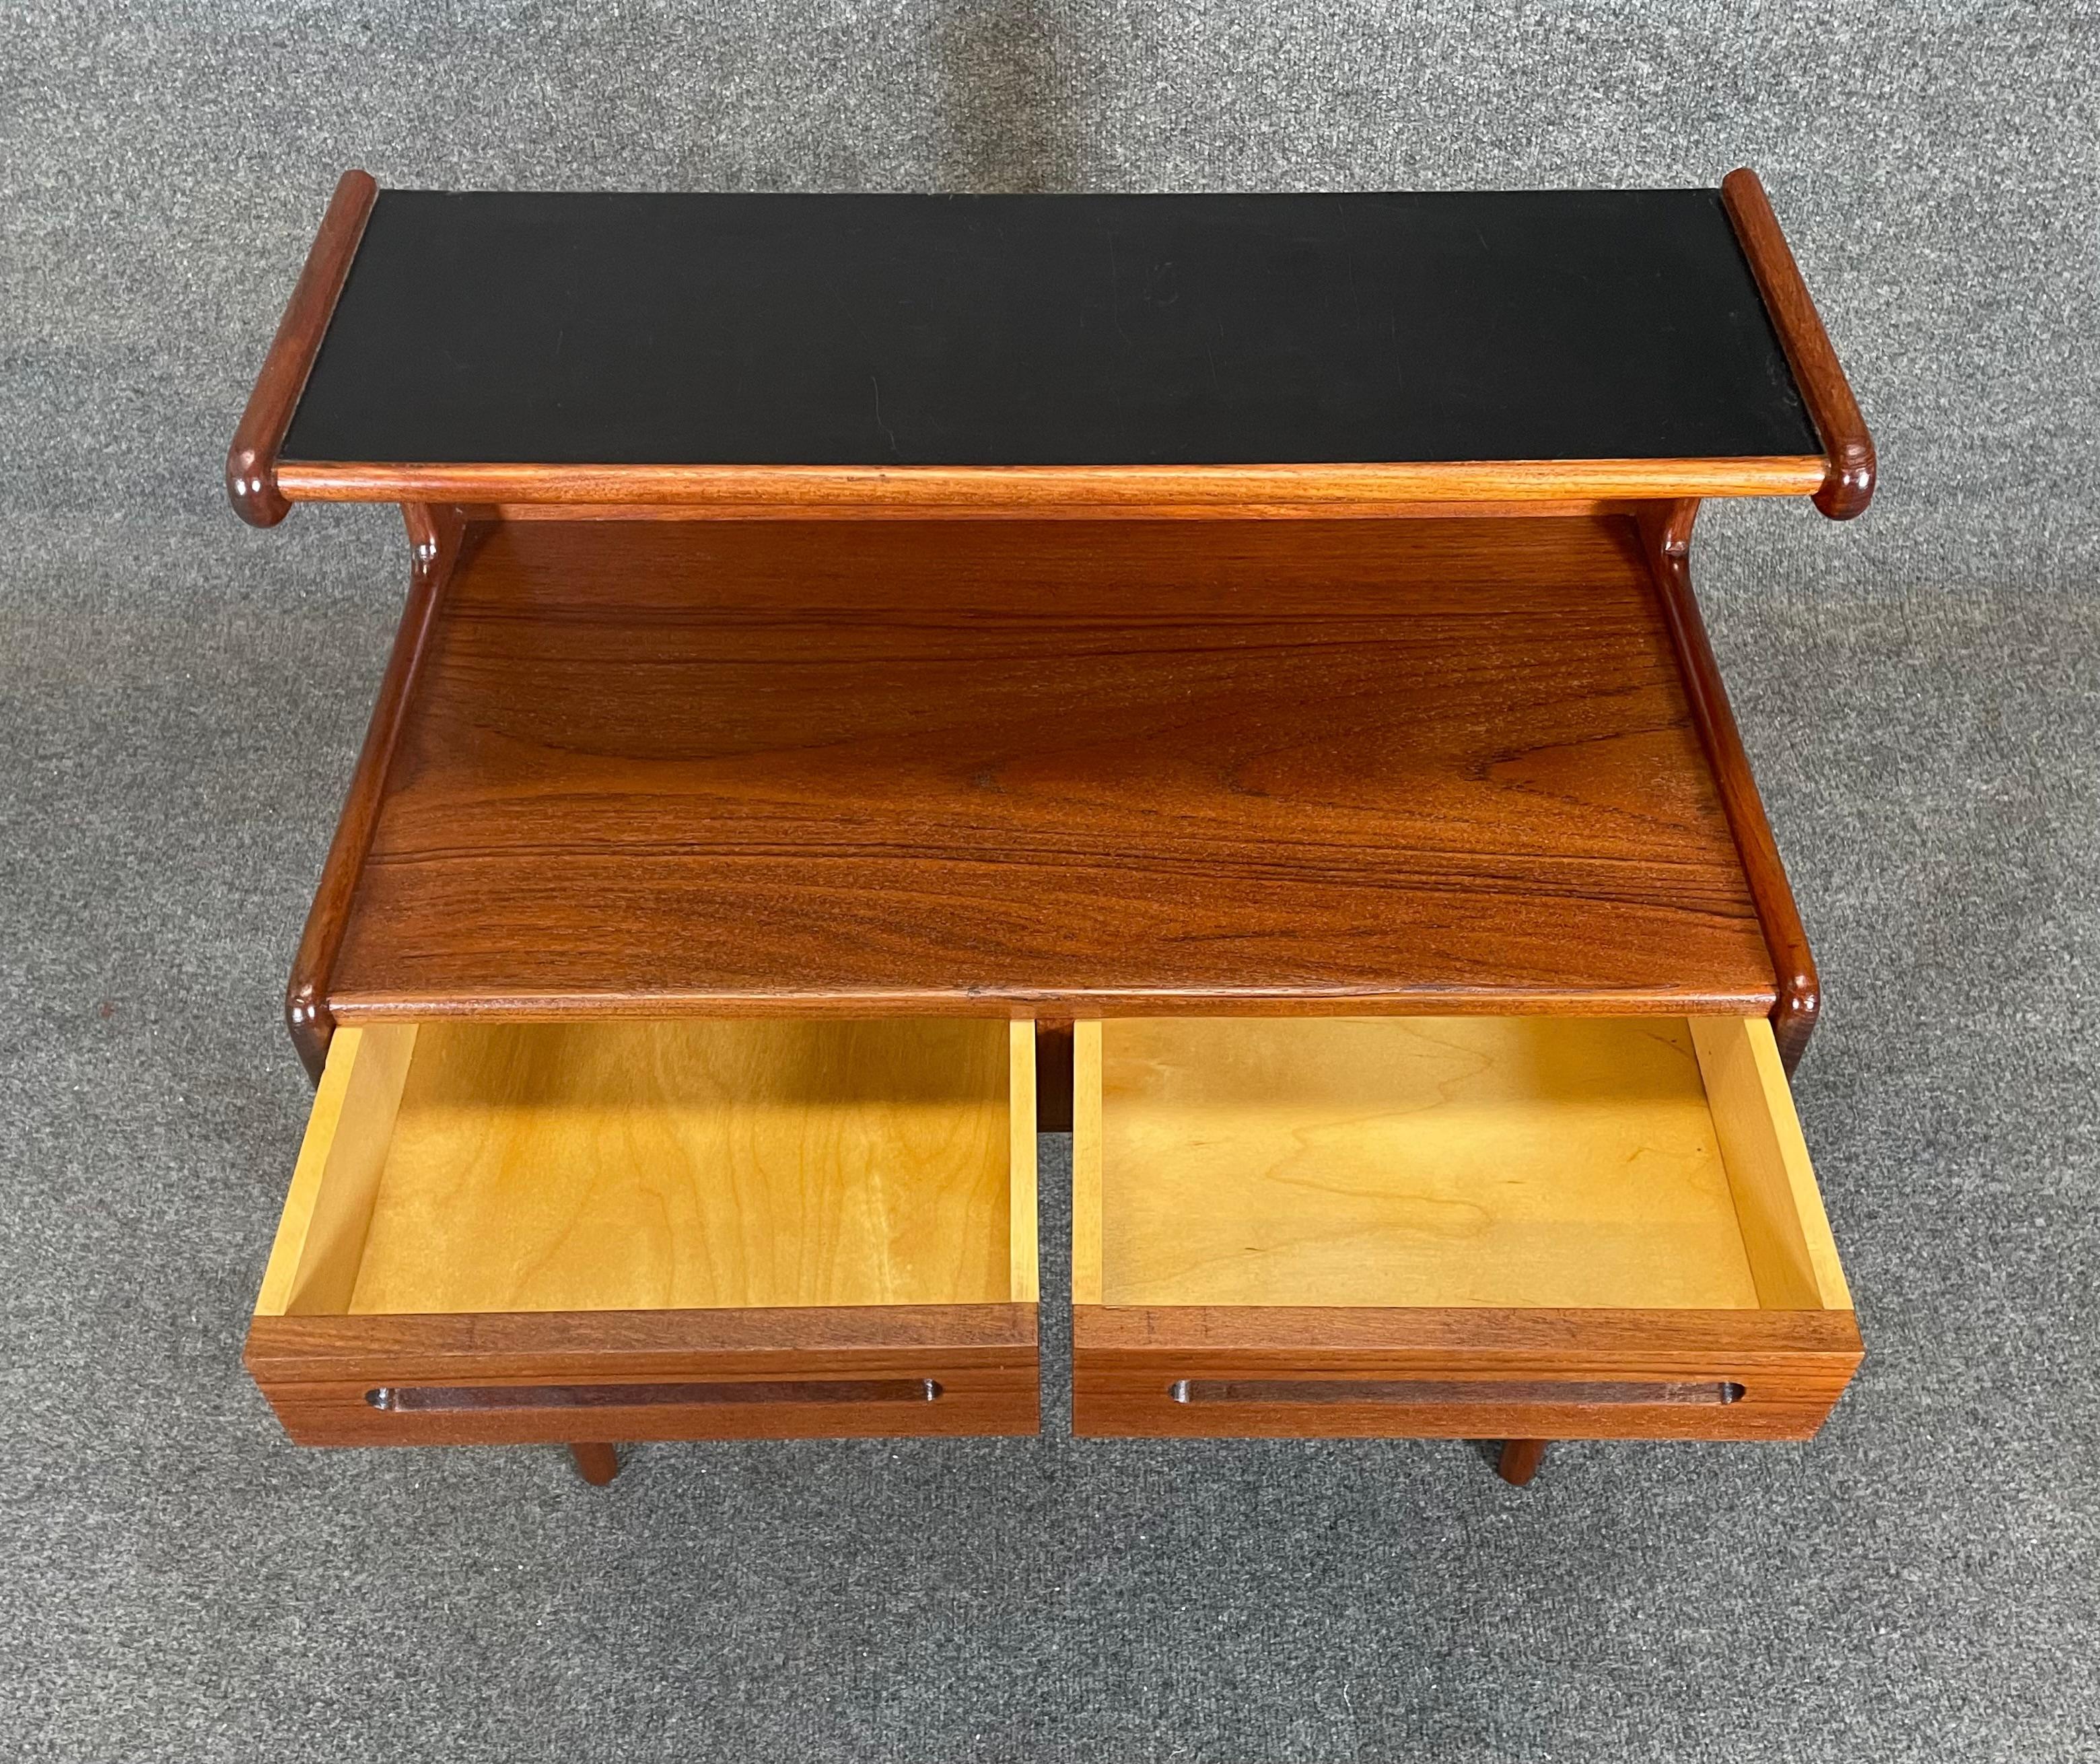 Here is a beautiful scandinavian modern teak versatile side table-nightstand manufactured in Denmark in the 1960's.
This lovely piece, recently imported from Europe to California before its refinishing, features a vibrant wood grain, a top with an